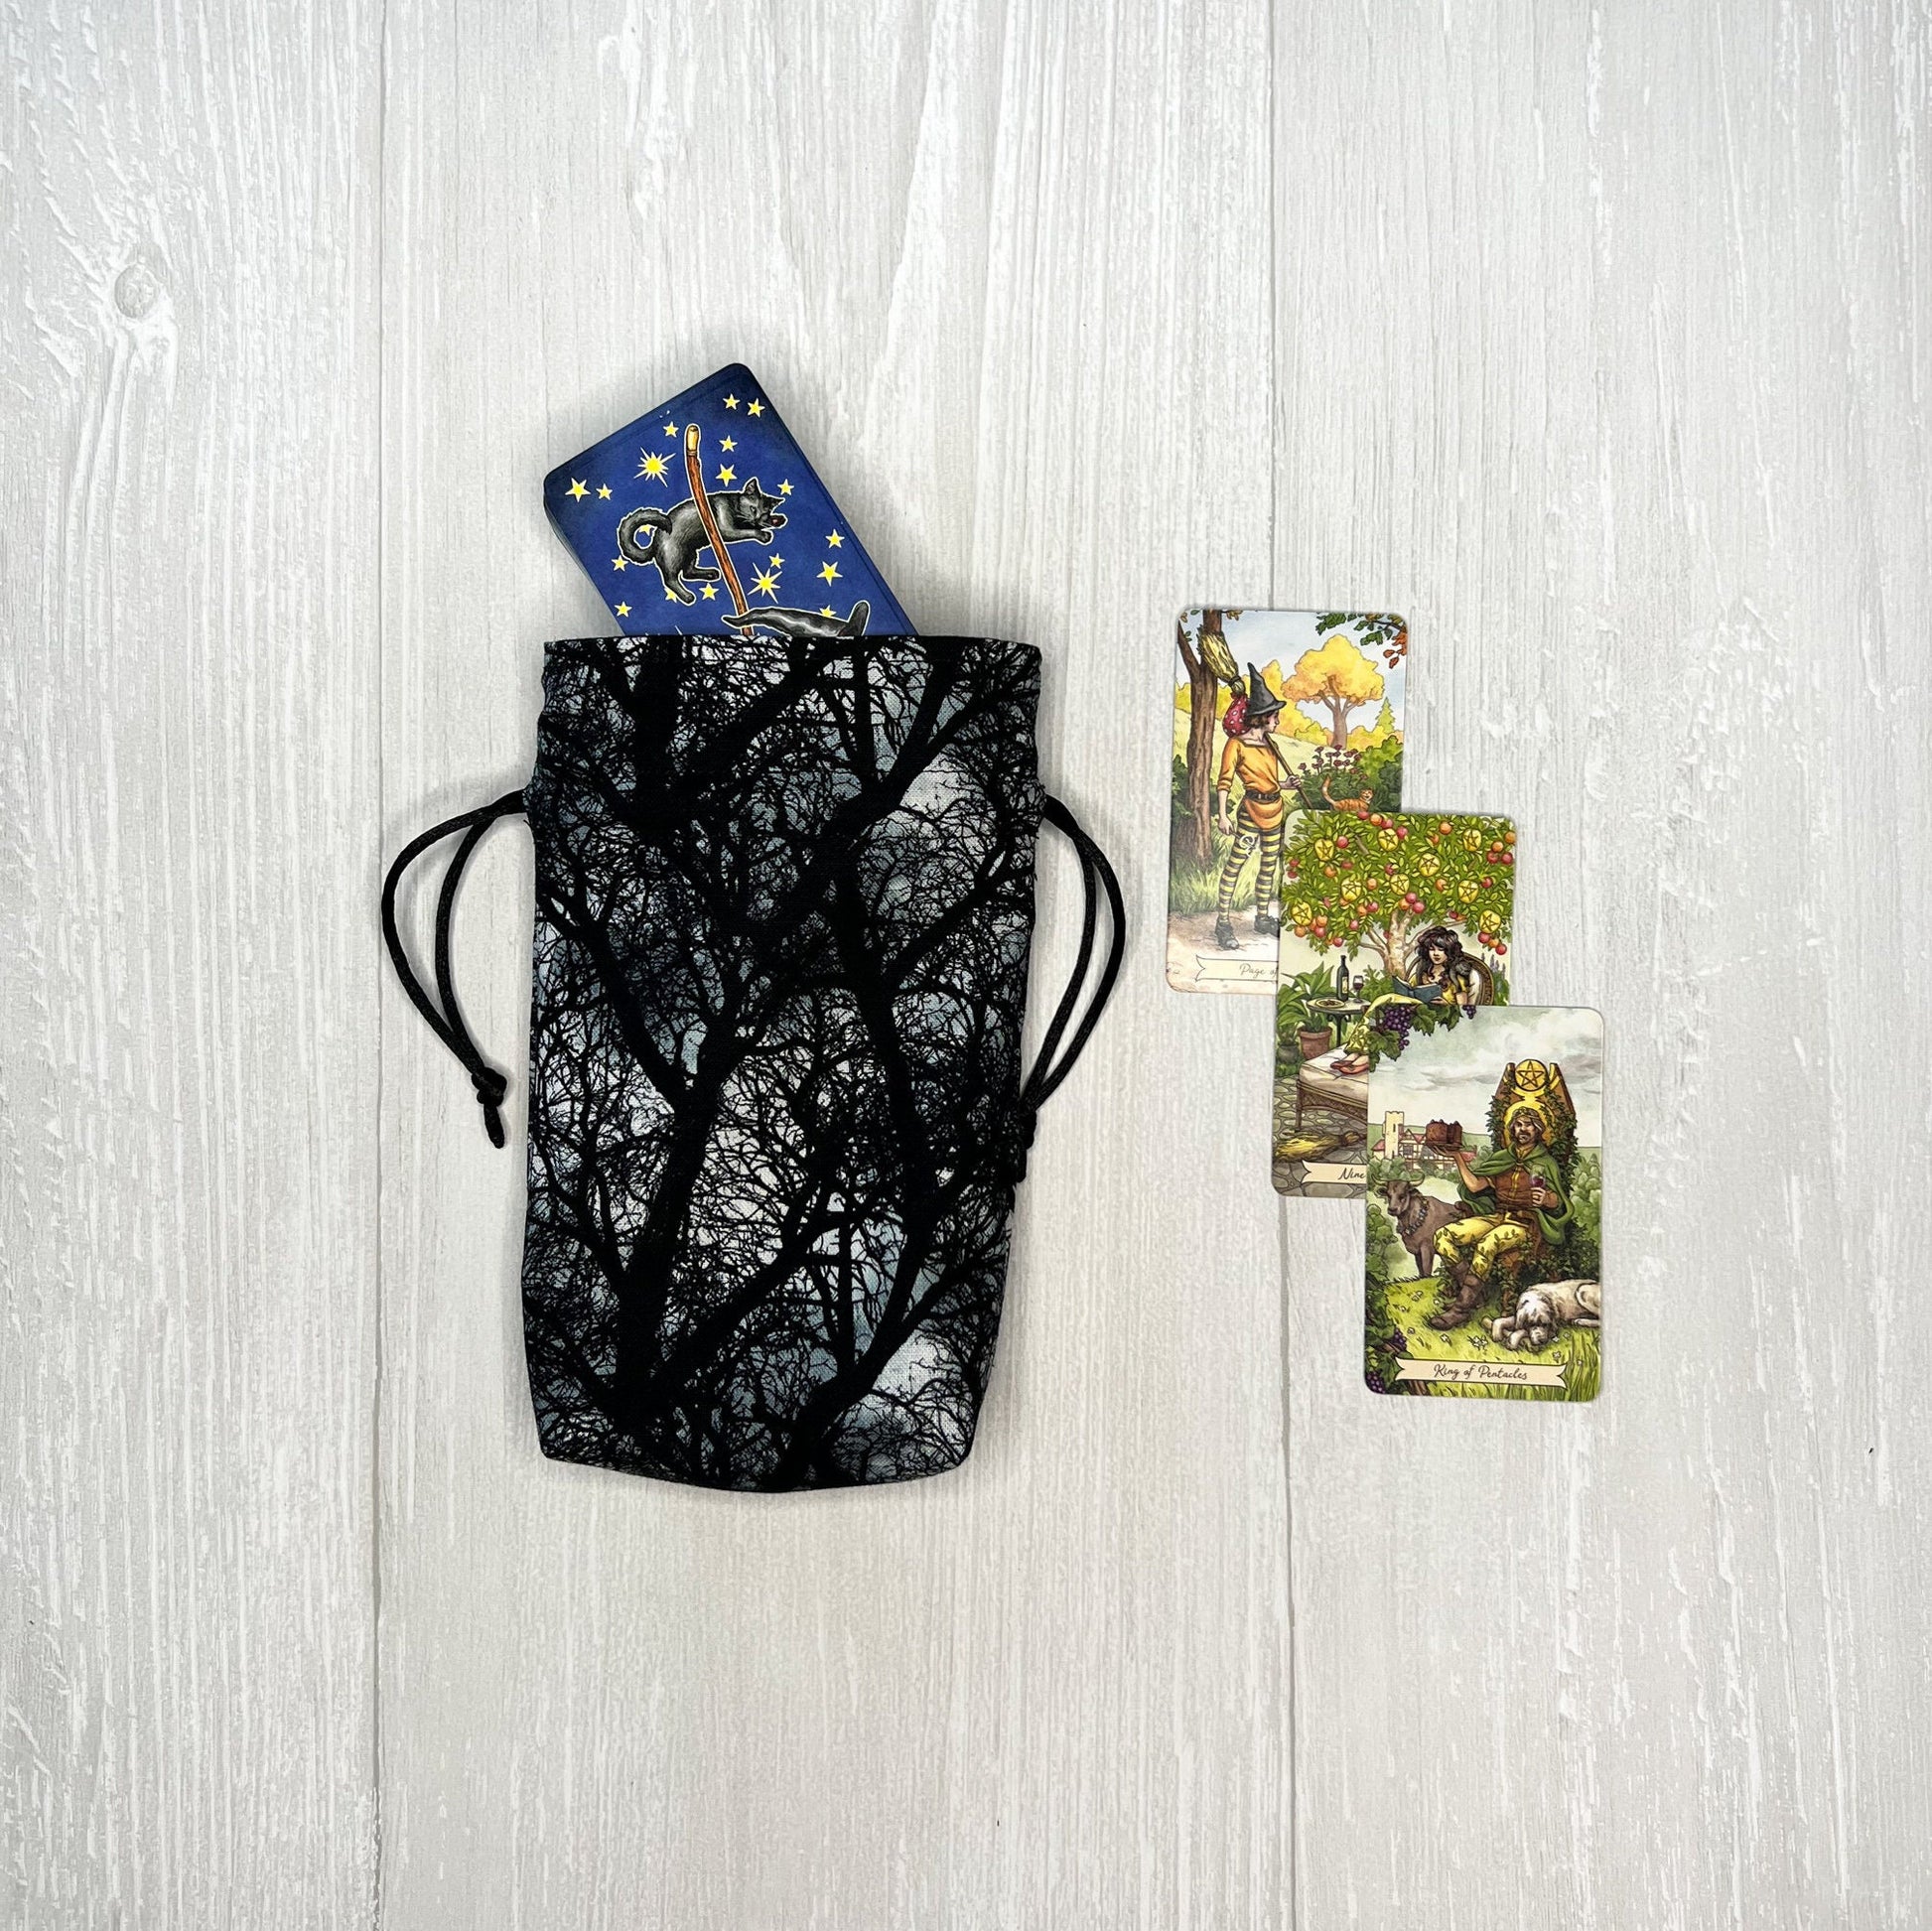 Forest Mini Tarot Deck Bag, Drawstring Pouch, Pocket Tarot, Dice Rune Bag, Witchcraft Wiccan Pagan Supplies Gift, Halloween Divination Tools